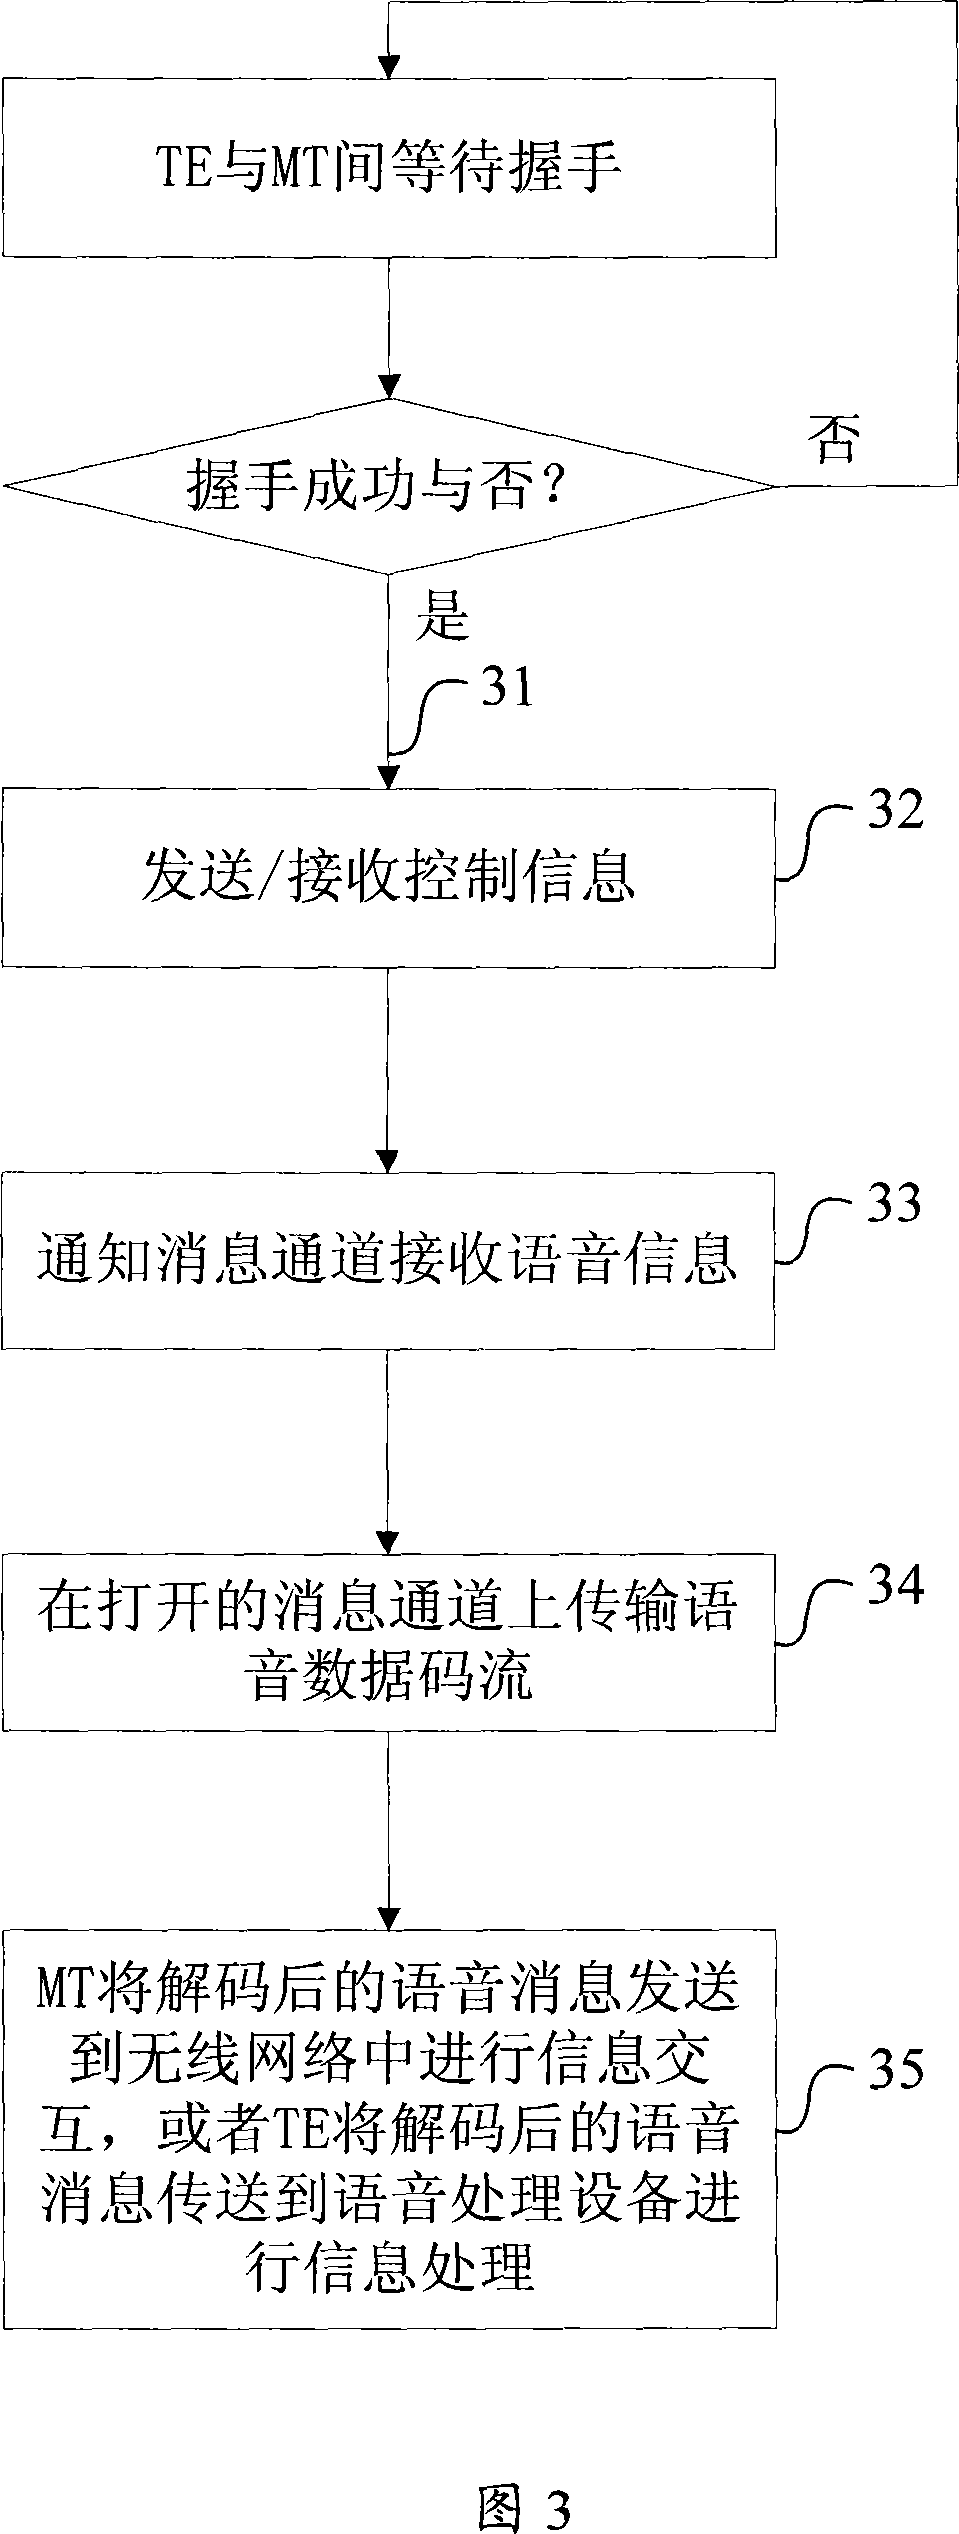 Method and device for establishing information transmission between terminal device and mobile terminal